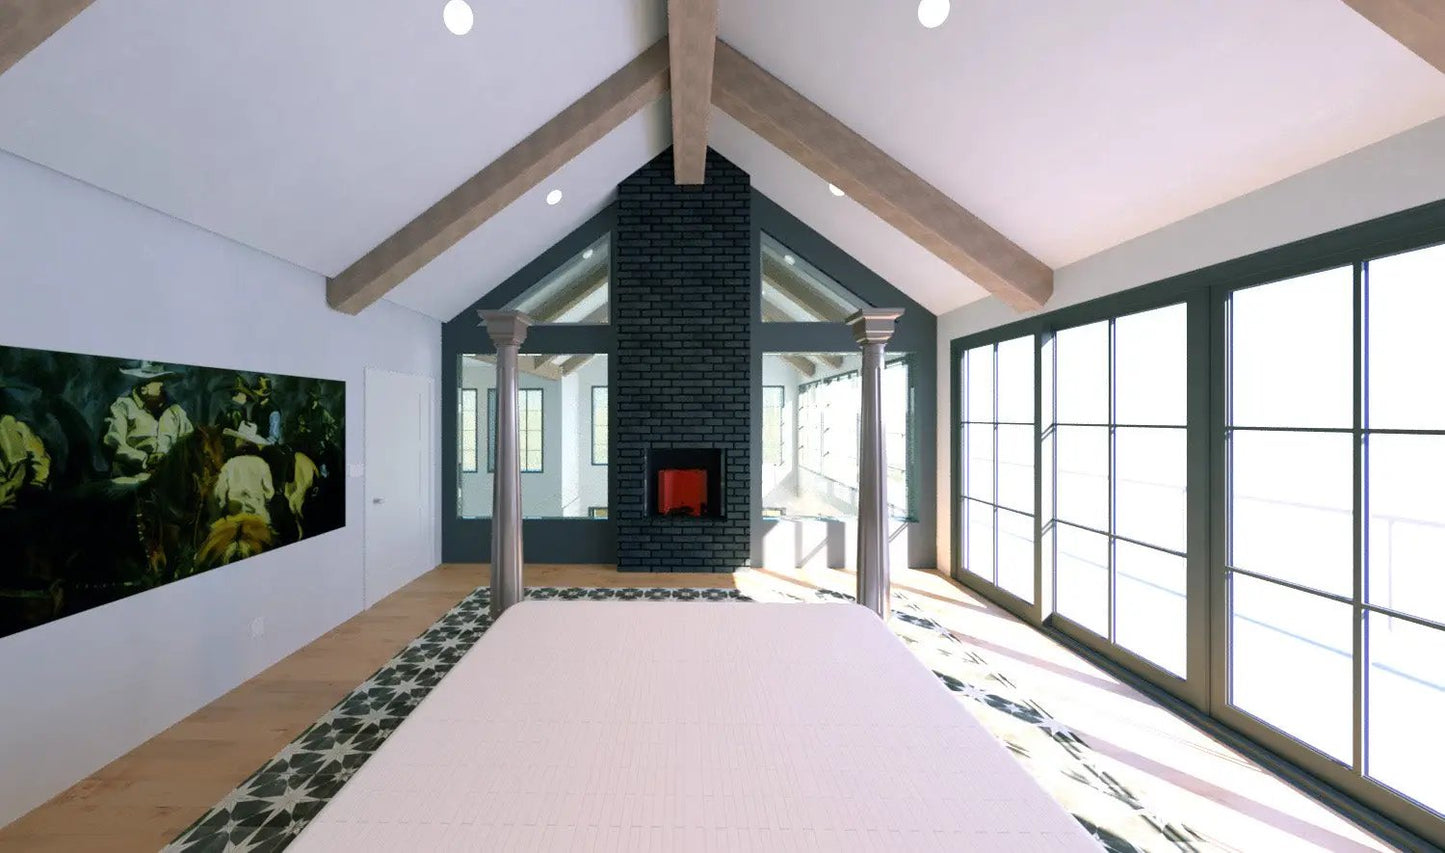 vaulted bedroom with fireplace and large windows